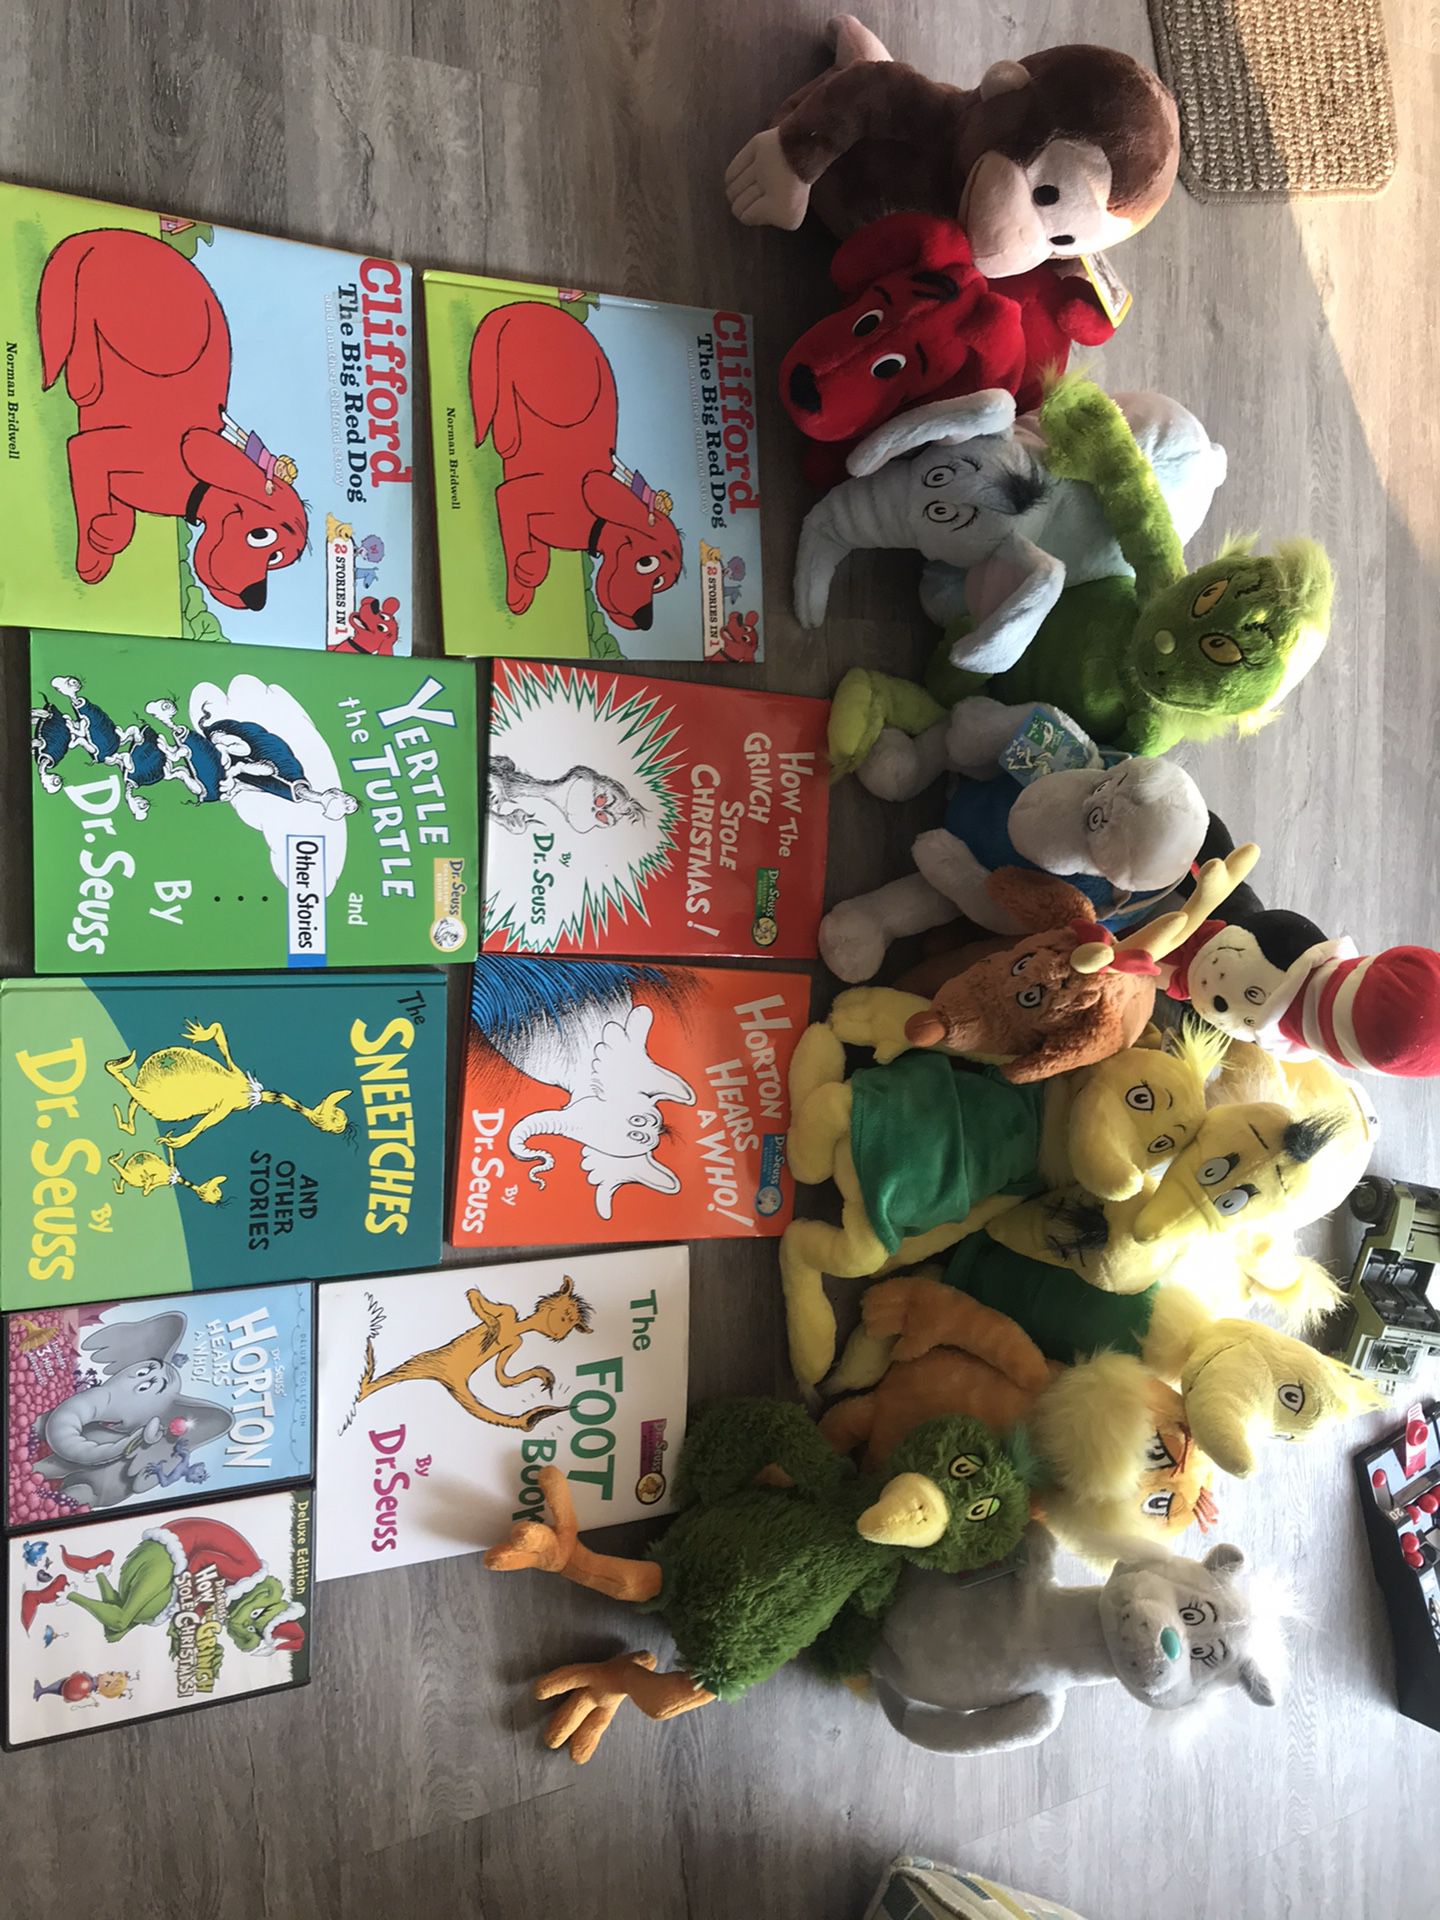 Dr.Seuss stuffed animals $5 dollars each set, animal and book or $40 for all